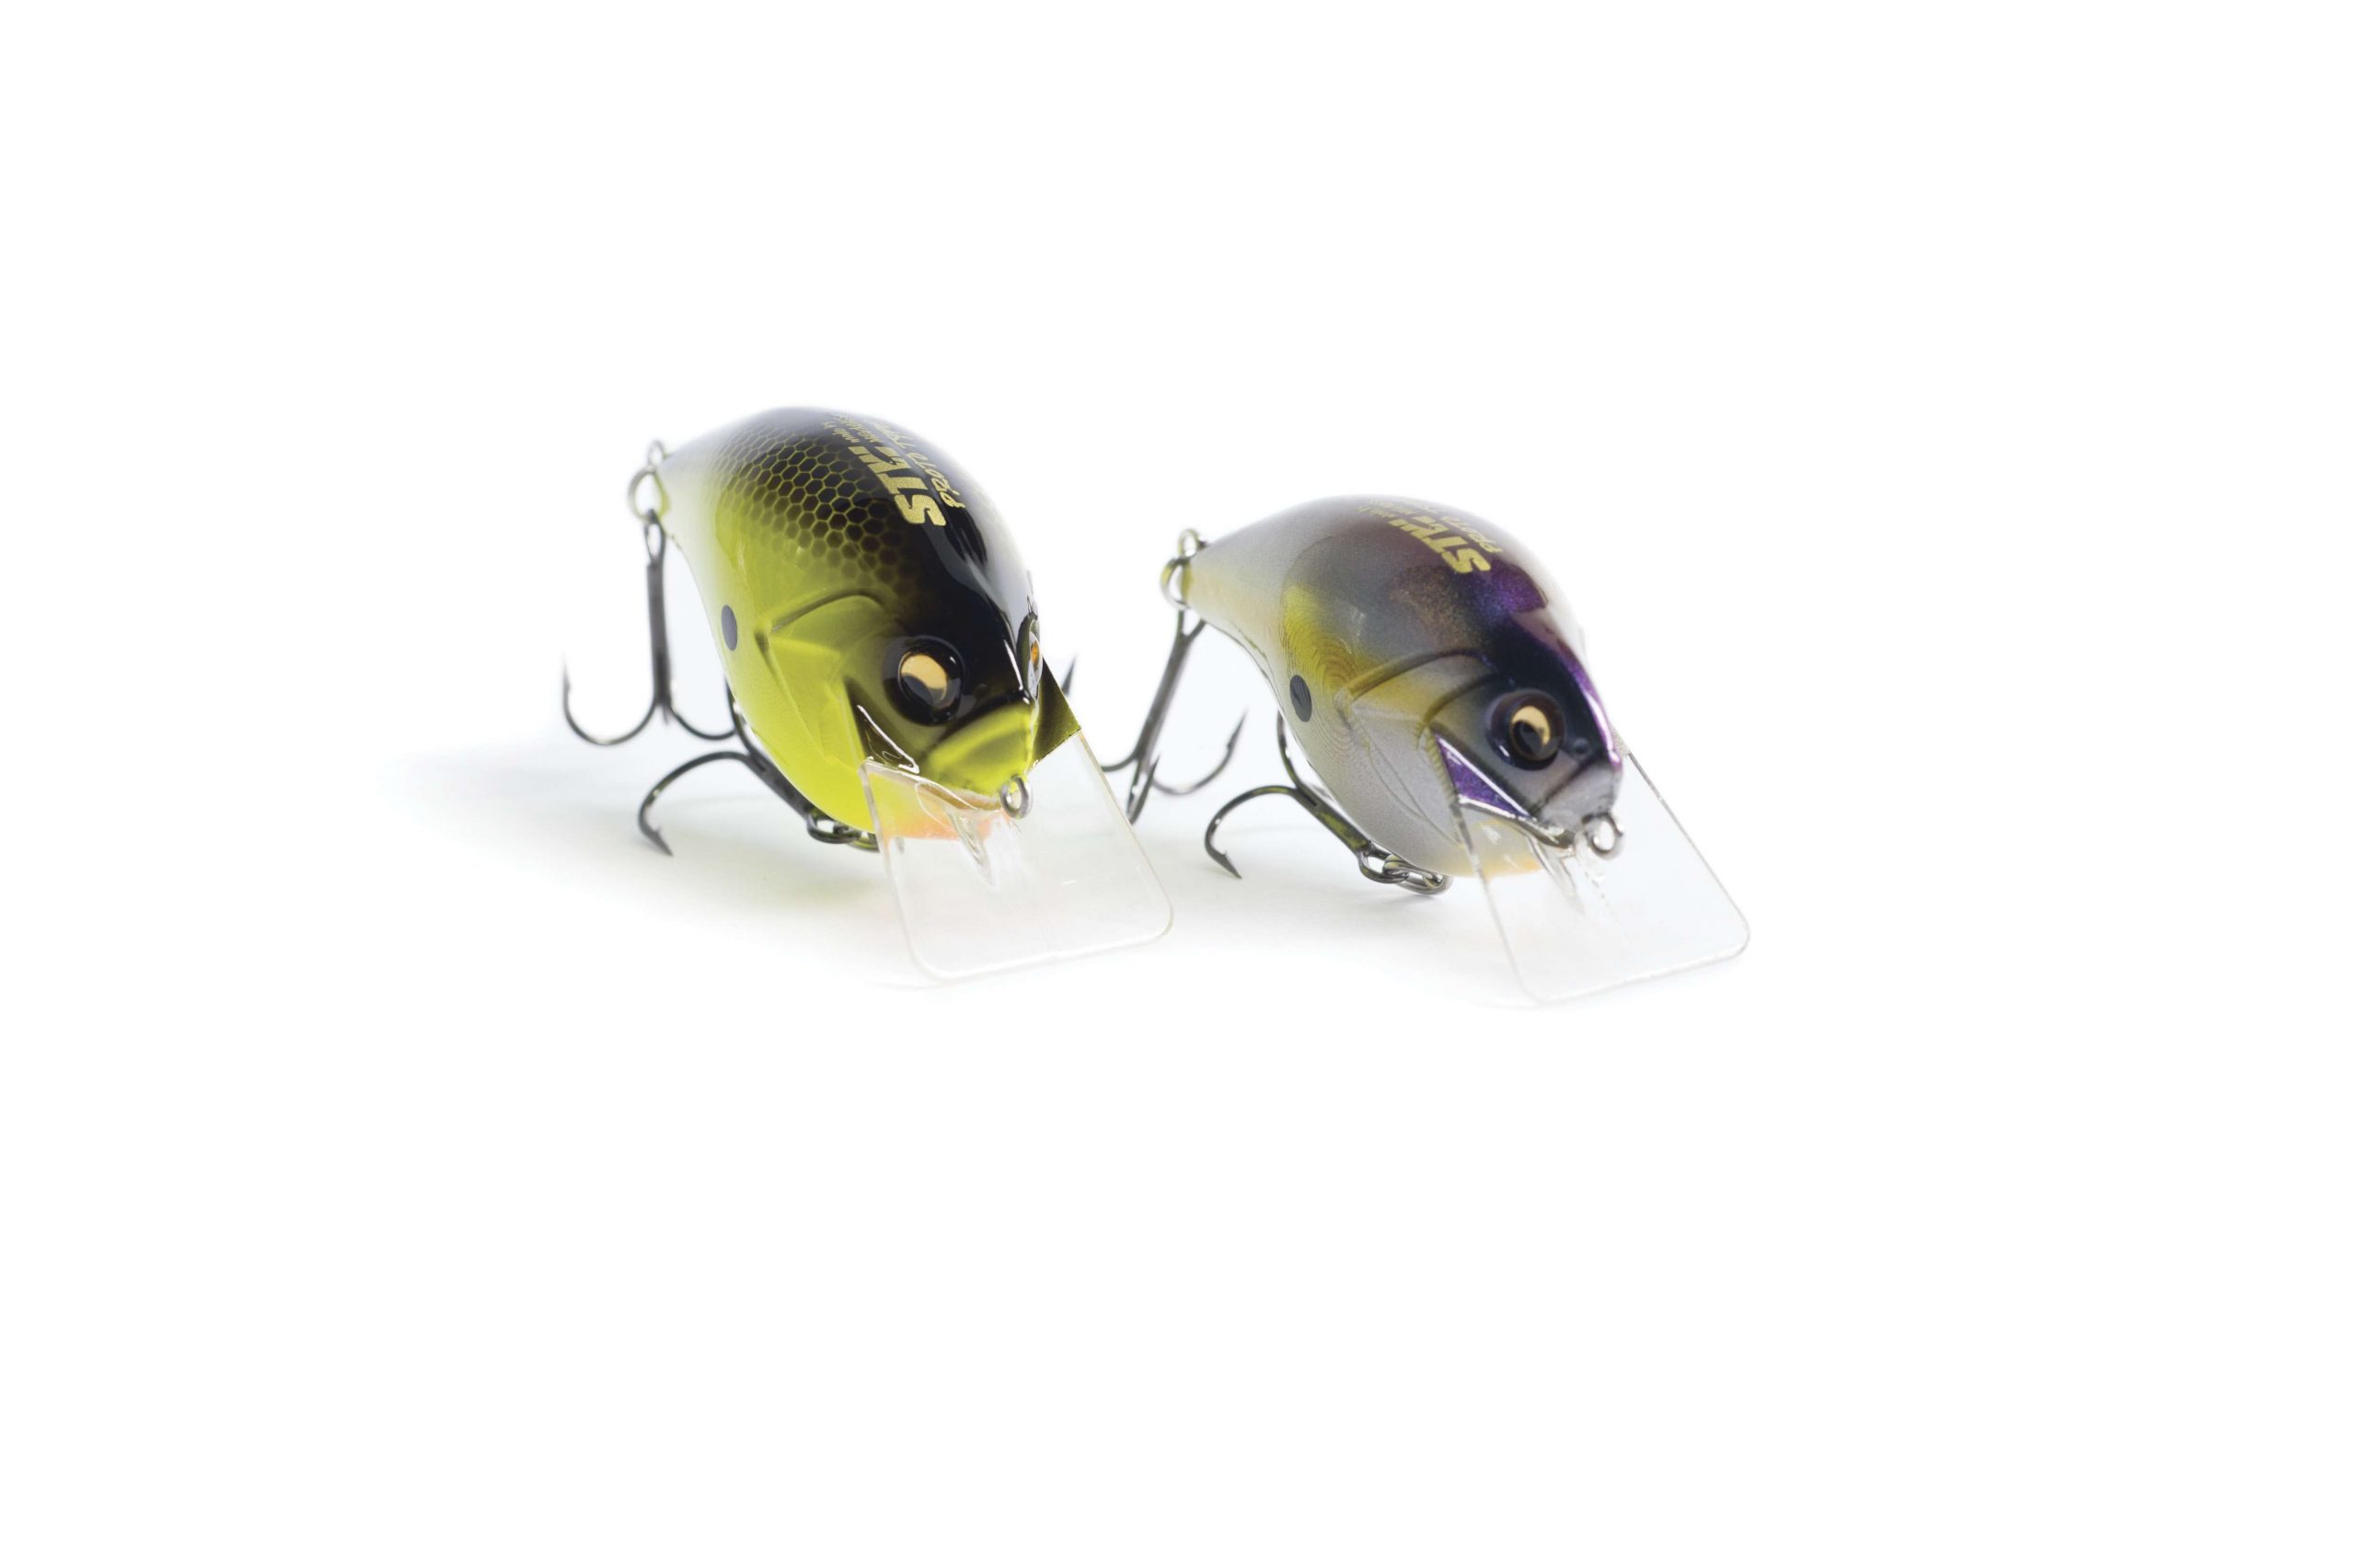 <B>MEGABASS S-CRANK</b>
Honed and refined over the past two years, this bait generates a hard-hitting wobble and hunting action throughout its retrieve. The bait is also very buoyant, helping anglers to reduce hang-ups and fish where the fish are. Like most Megabass baits, it is high end, selling for $19.99.